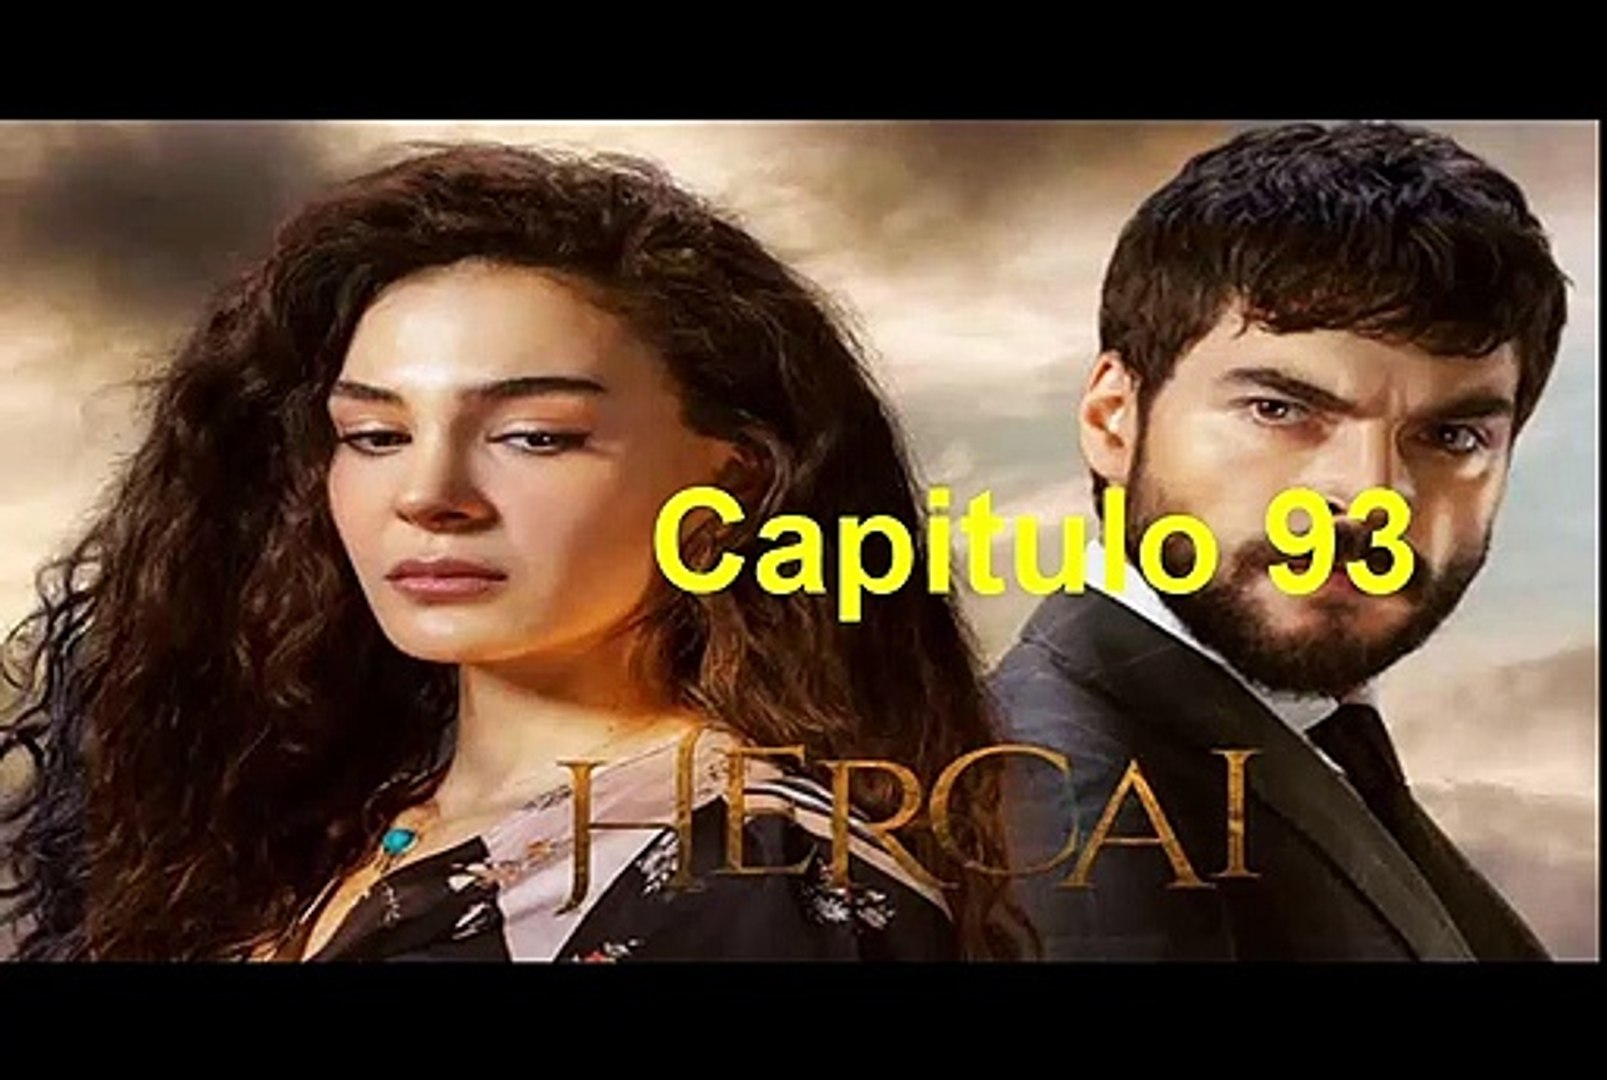 Hercai Capitulo 93 Completo - video Dailymotion